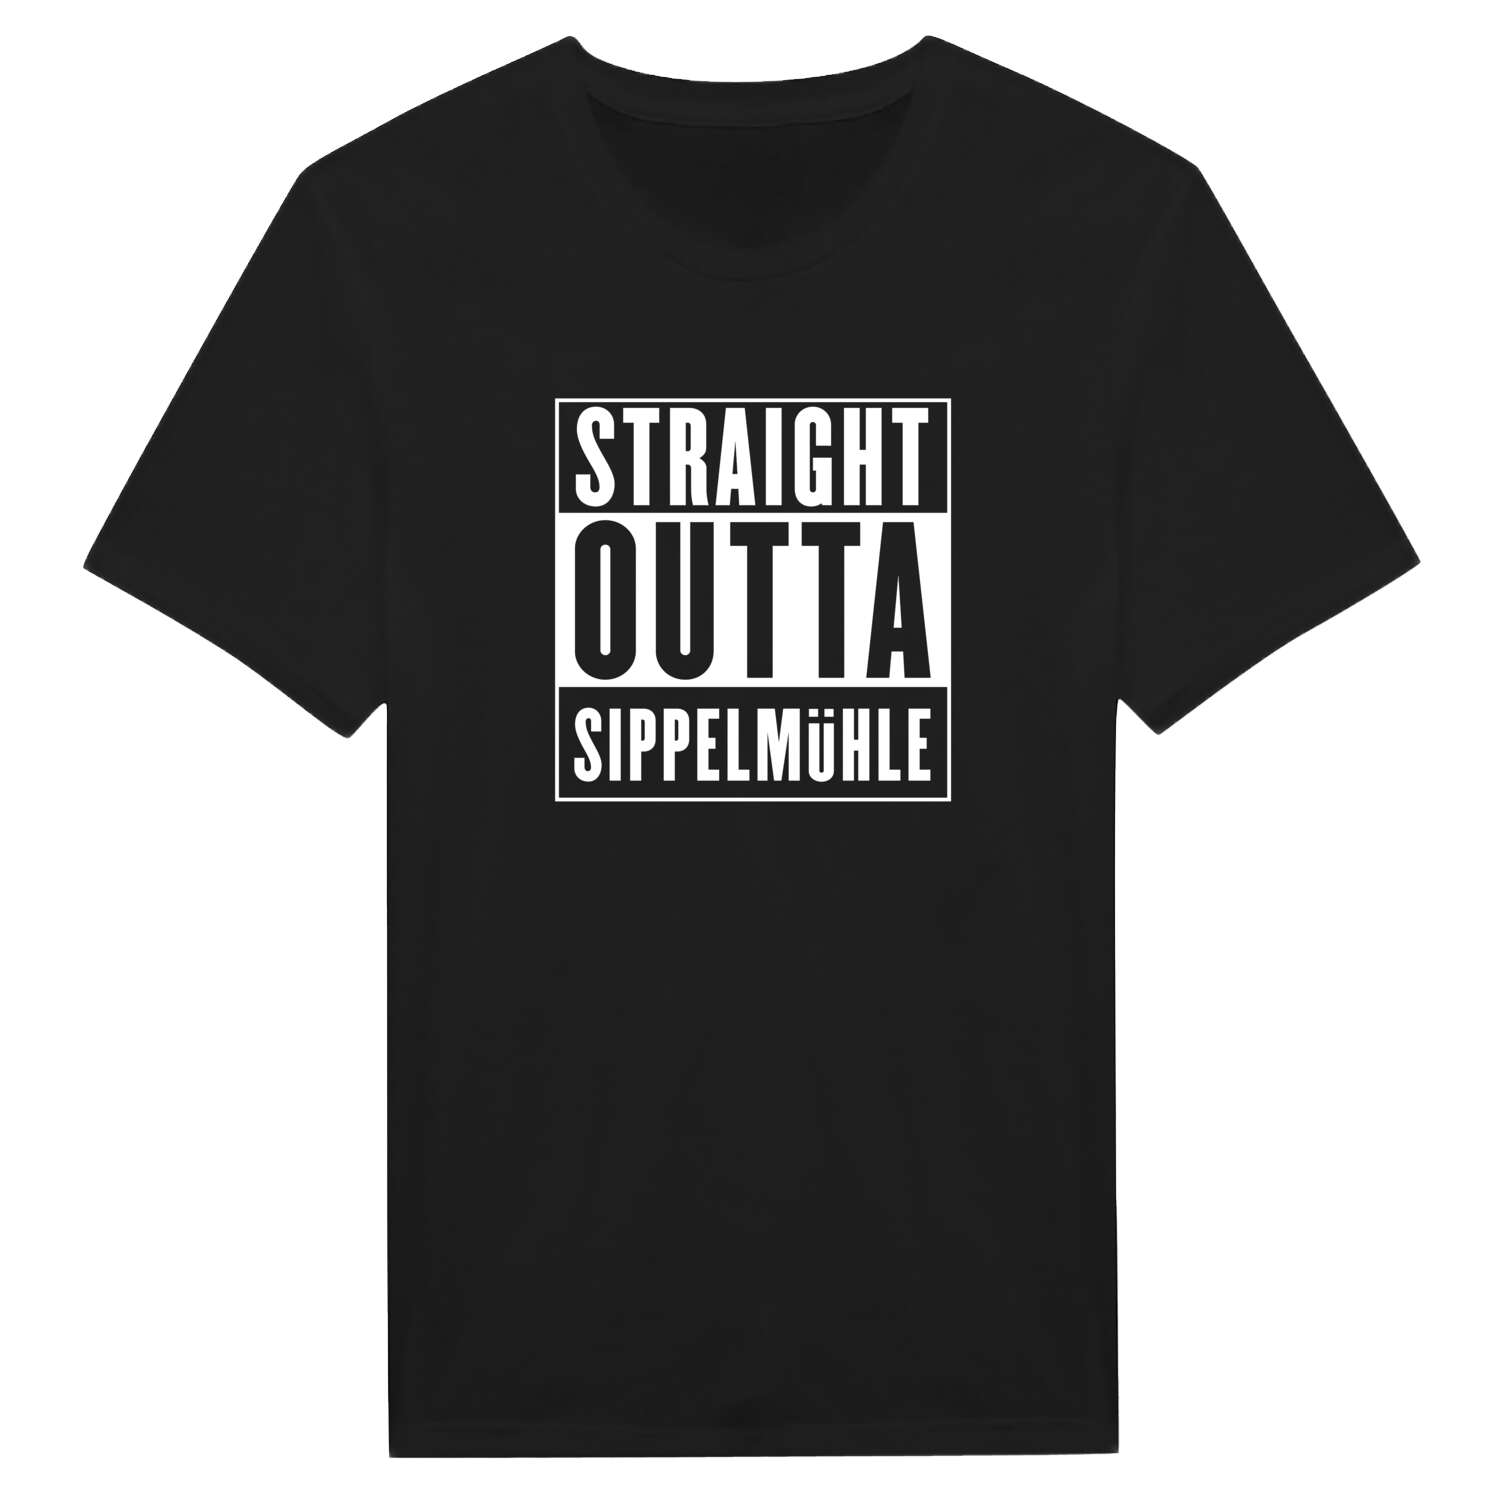 Sippelmühle T-Shirt »Straight Outta«